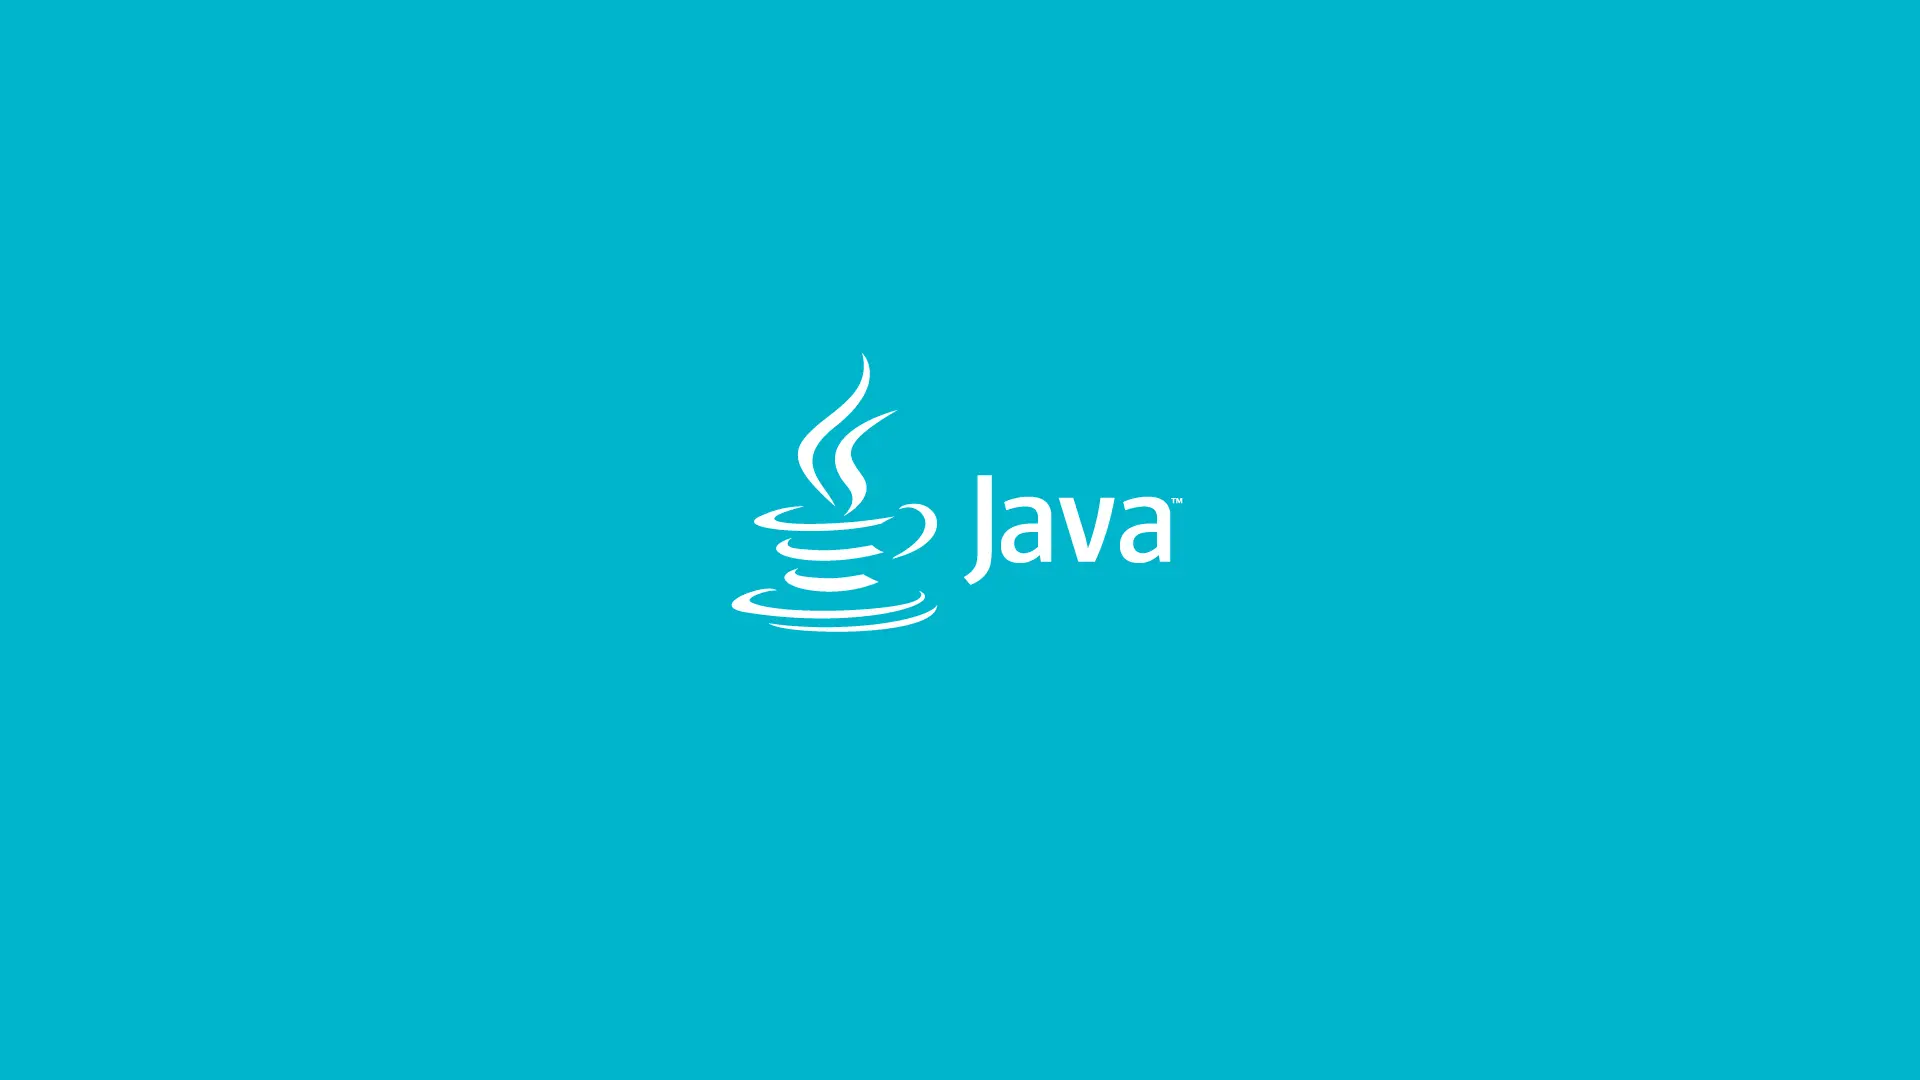 Top 17 Upcoming Java Conferences that you shouldn't miss